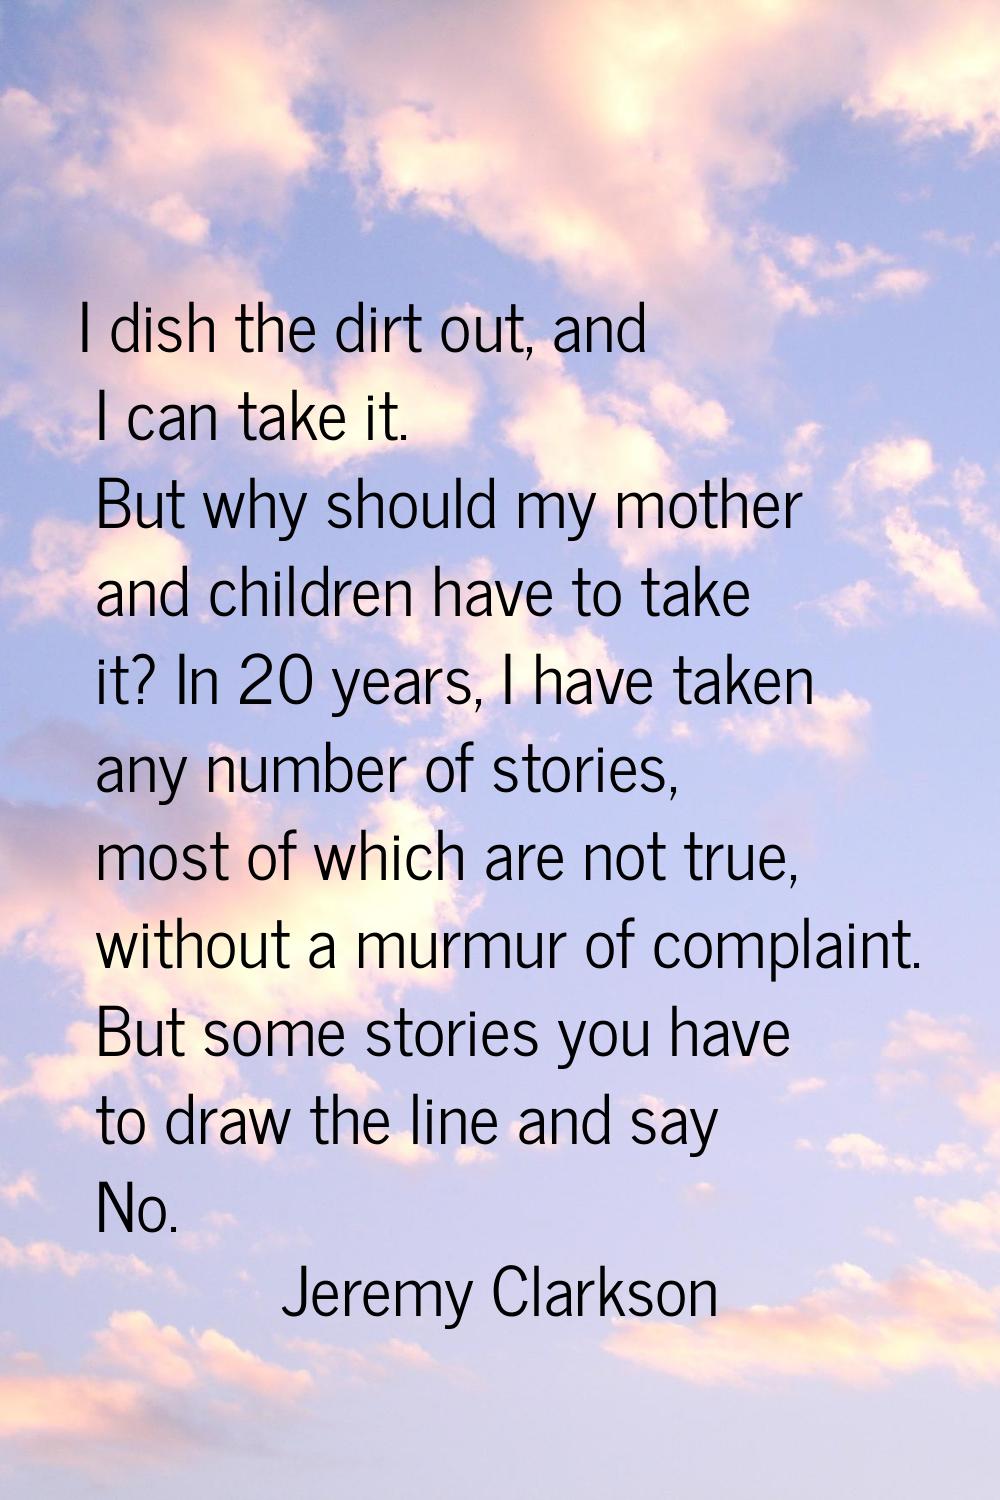 I dish the dirt out, and I can take it. But why should my mother and children have to take it? In 2